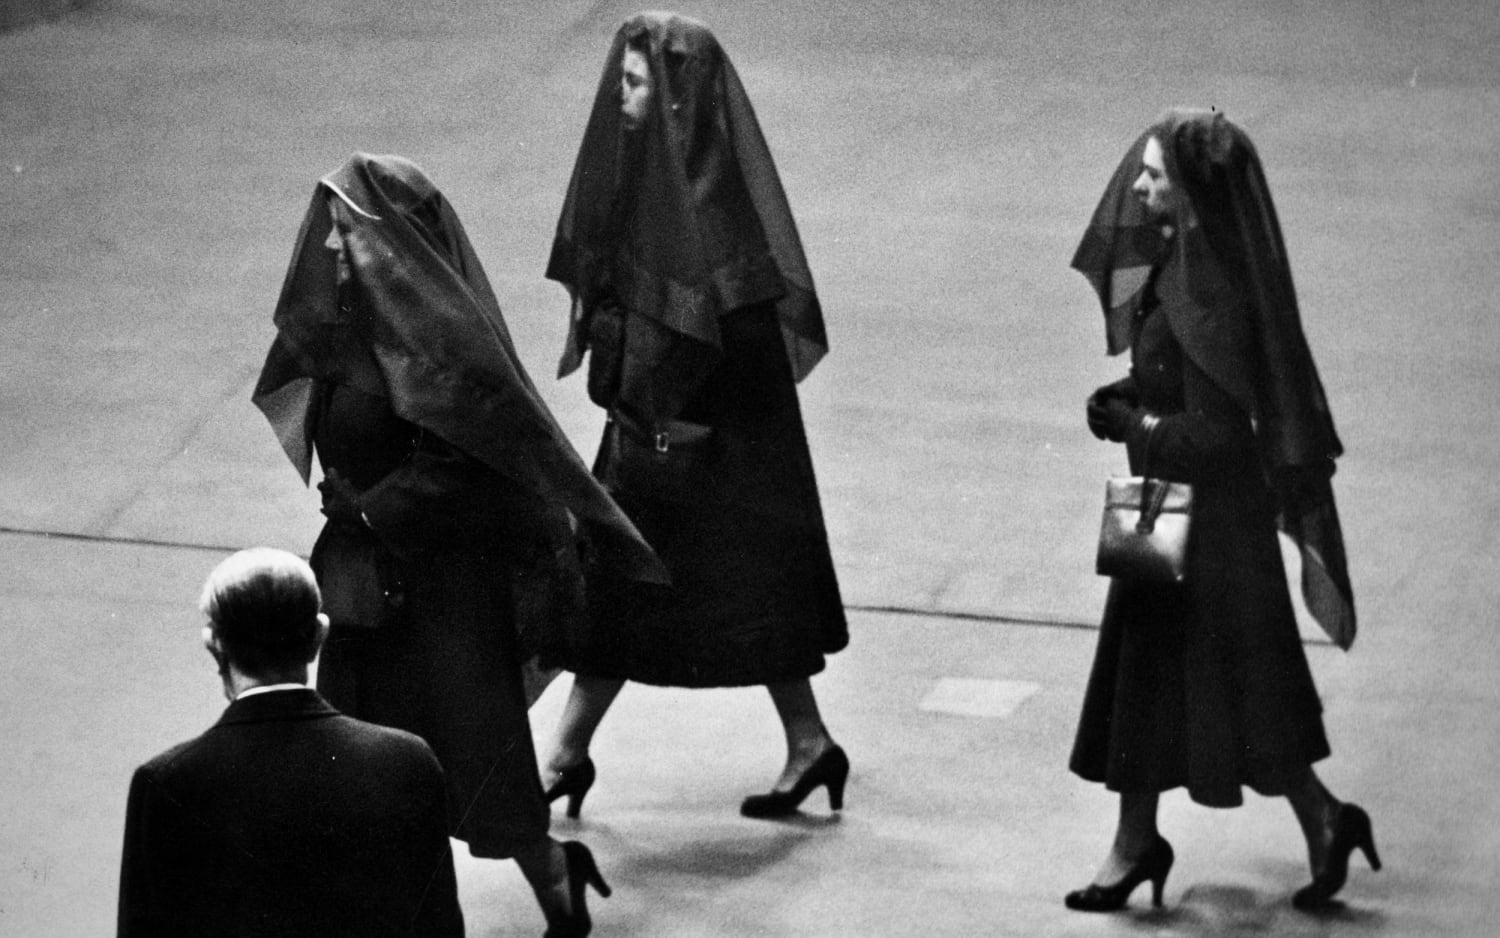 The Queen Mother, the new Queen Elizabeth II and Princess Margaret - veiled and in black for the funeral of King George VI. [15 February 1952 |